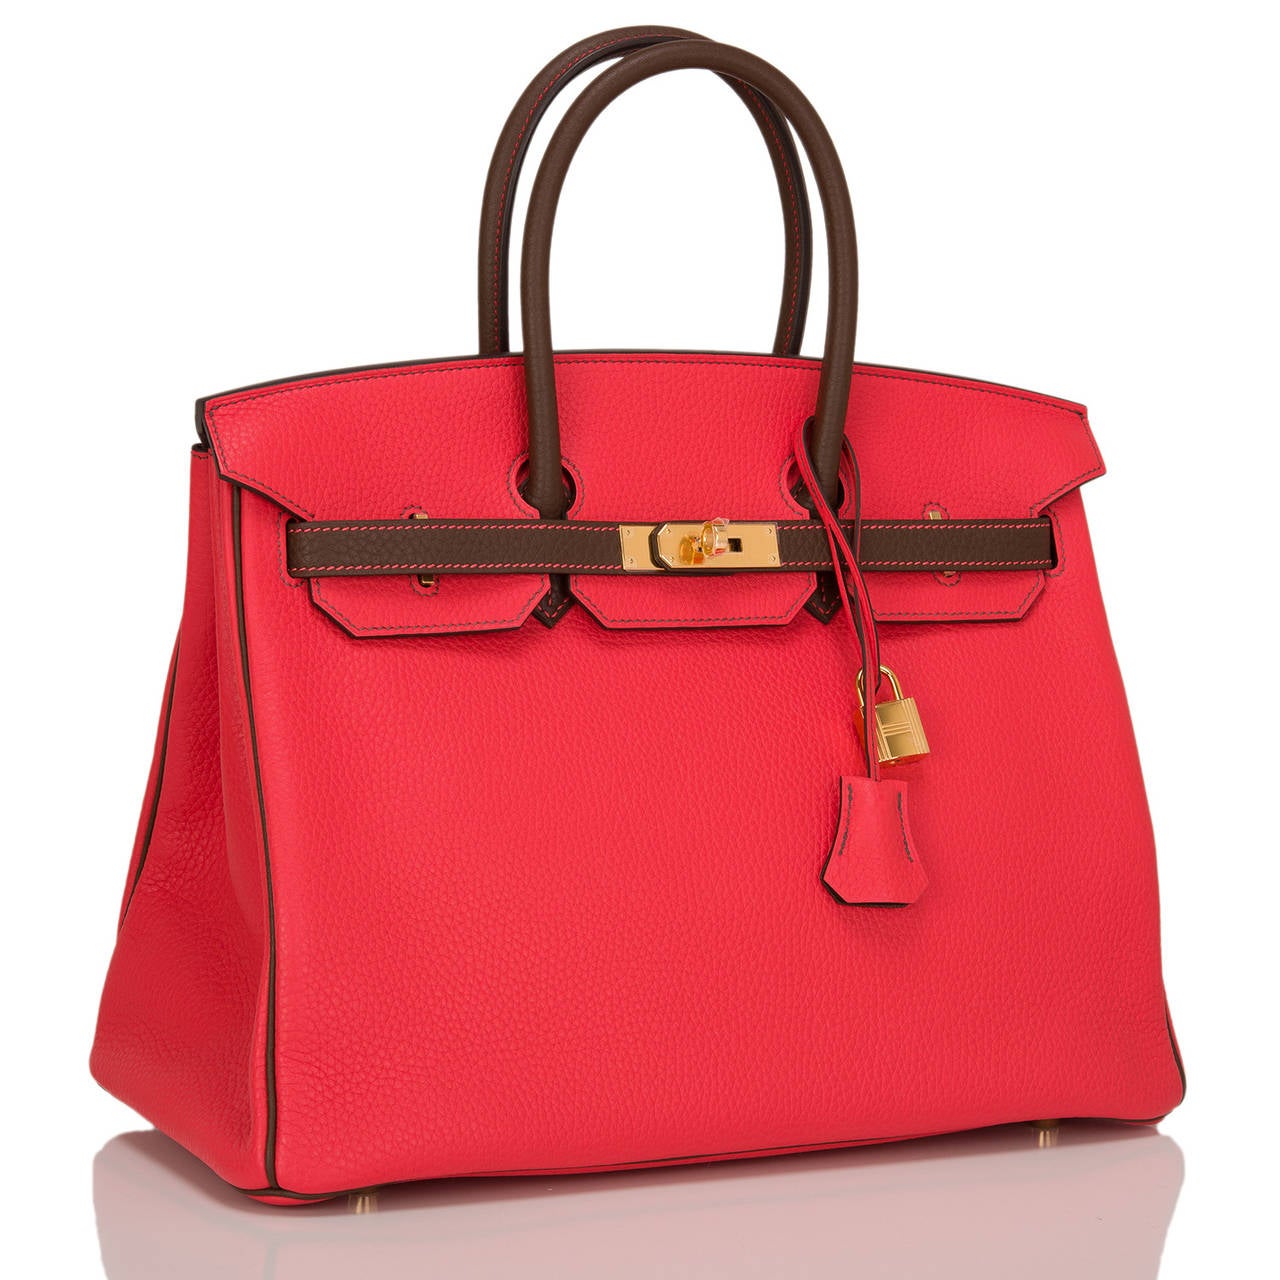 Hermes SO horseshoe (special order) bi-color Rouge Pivione and Cacao Birkin 35cm in togo (bull) leather with gold hardware.

This Birkin features tonal stitching, signature front toggle closure, a clochette with lock and two keys, and double